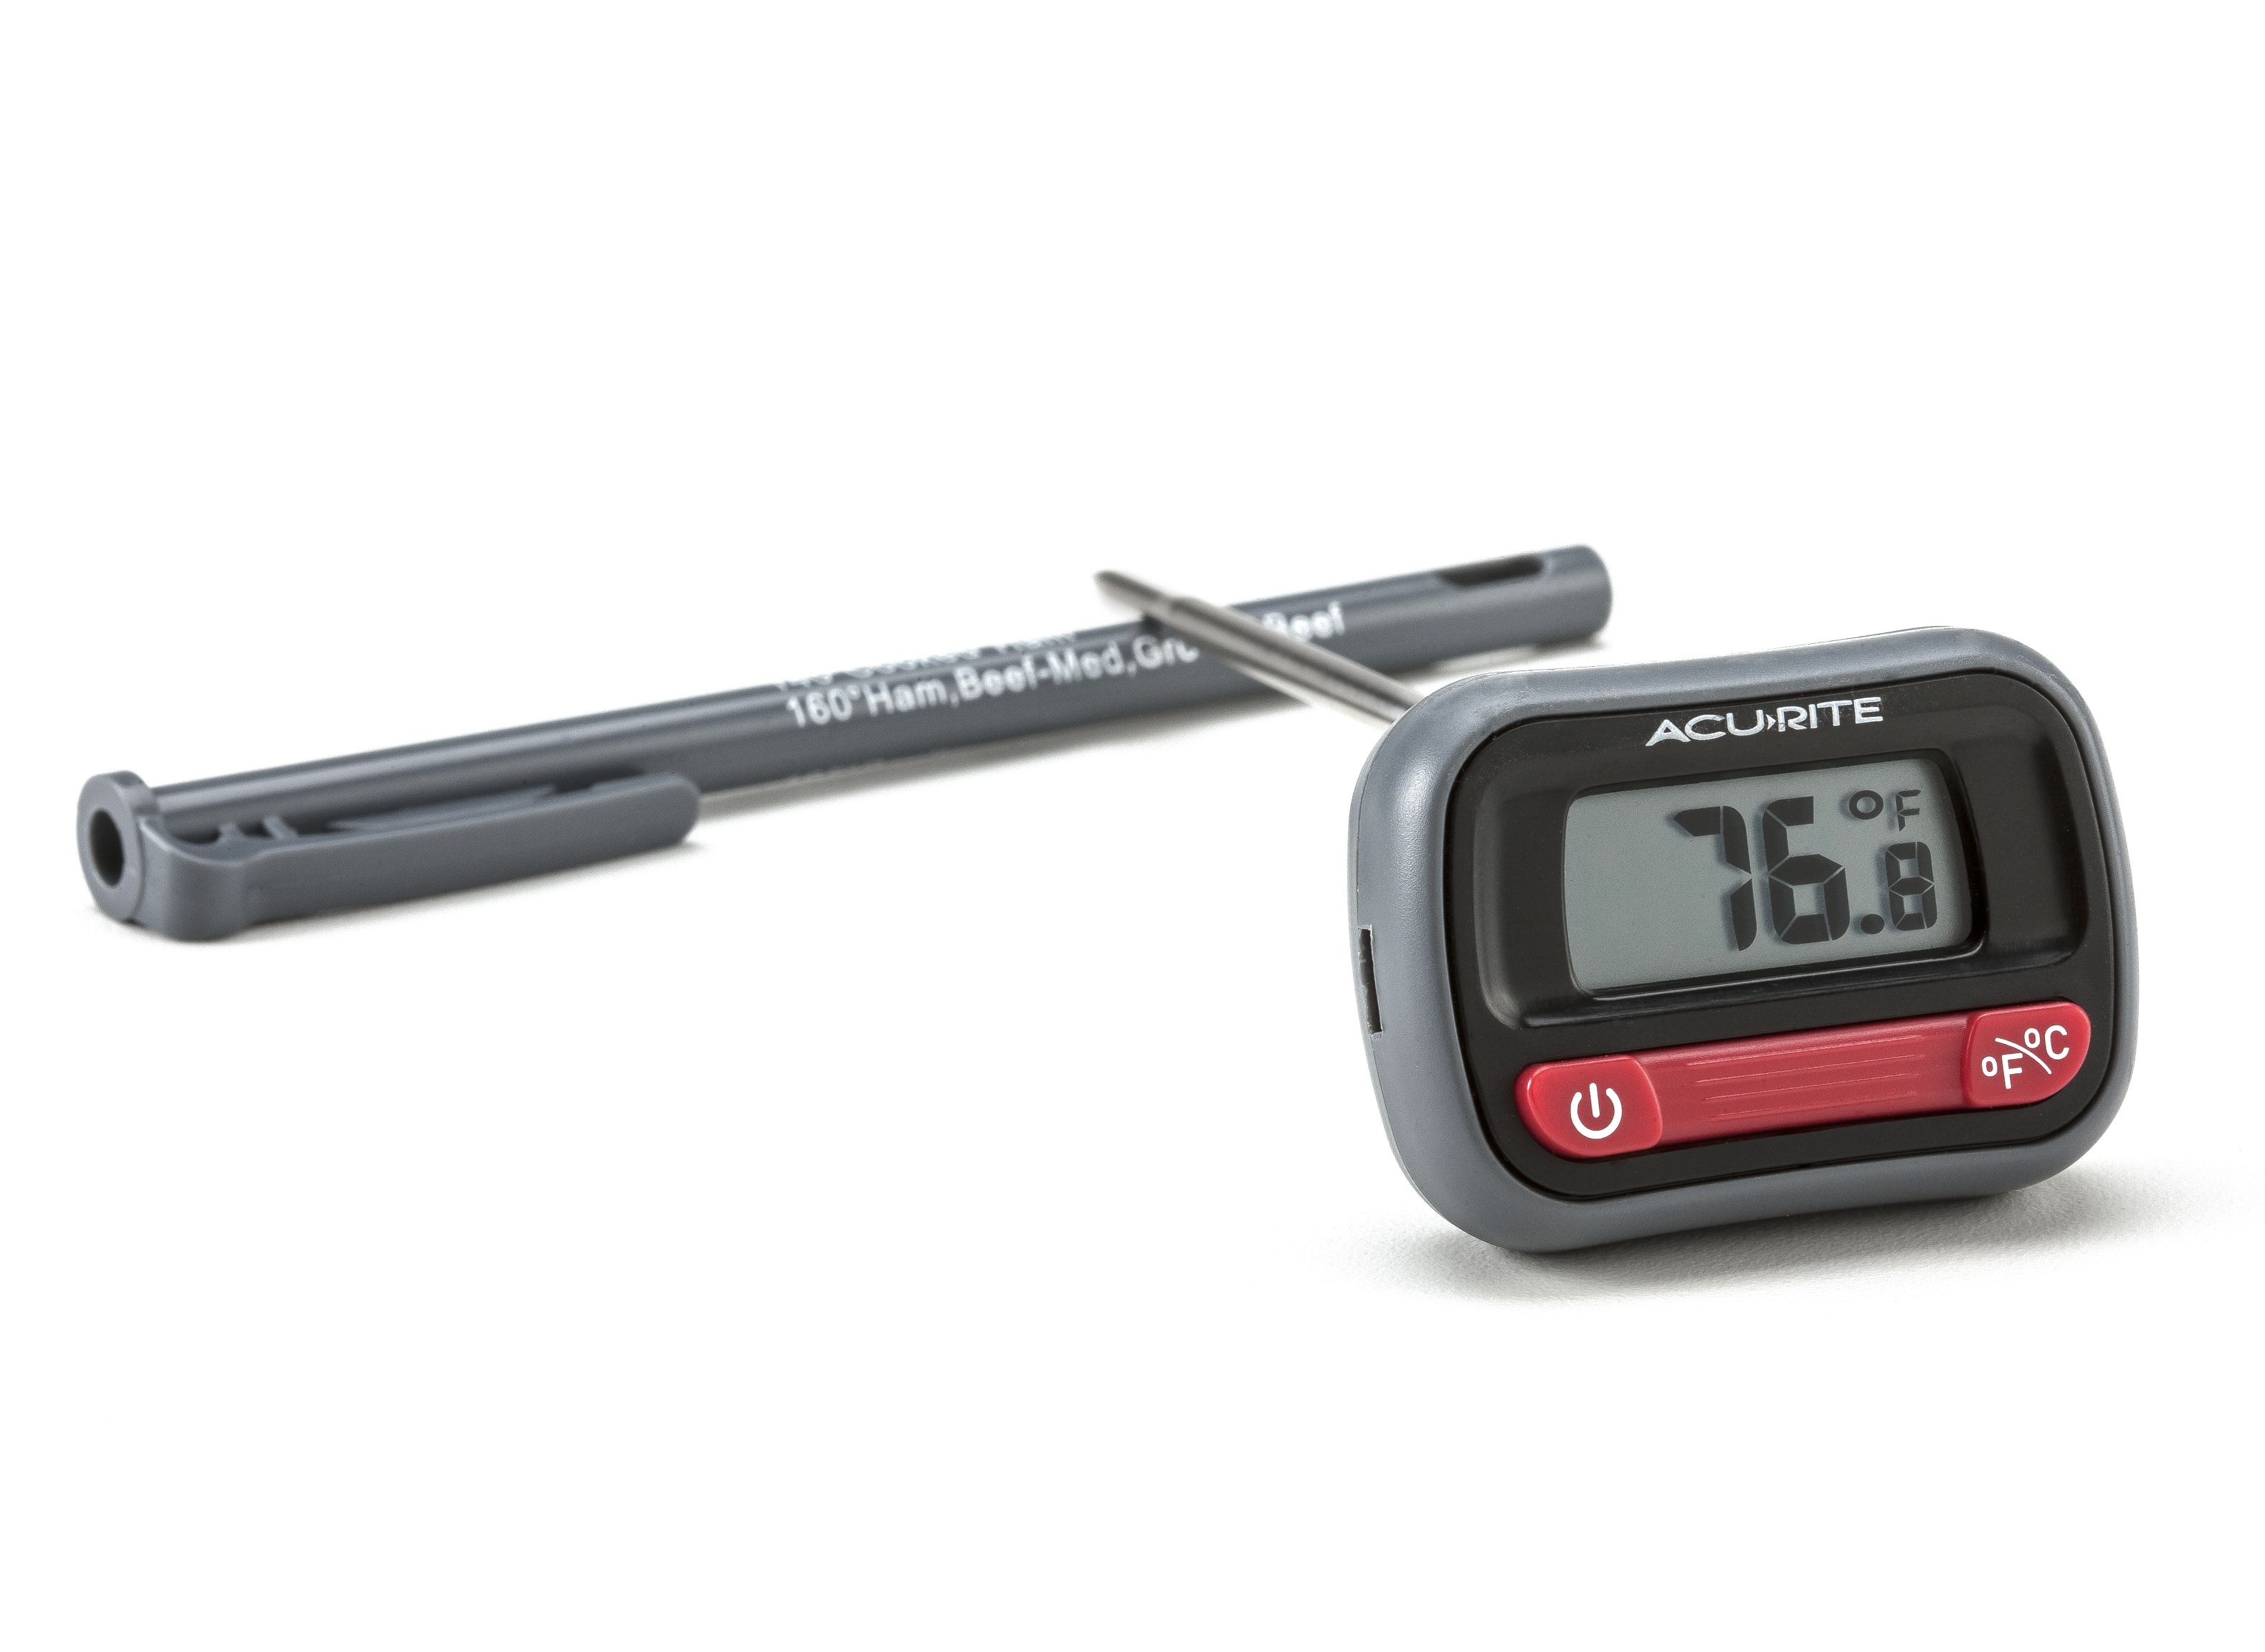 ACU-RITE Oven Thermometer